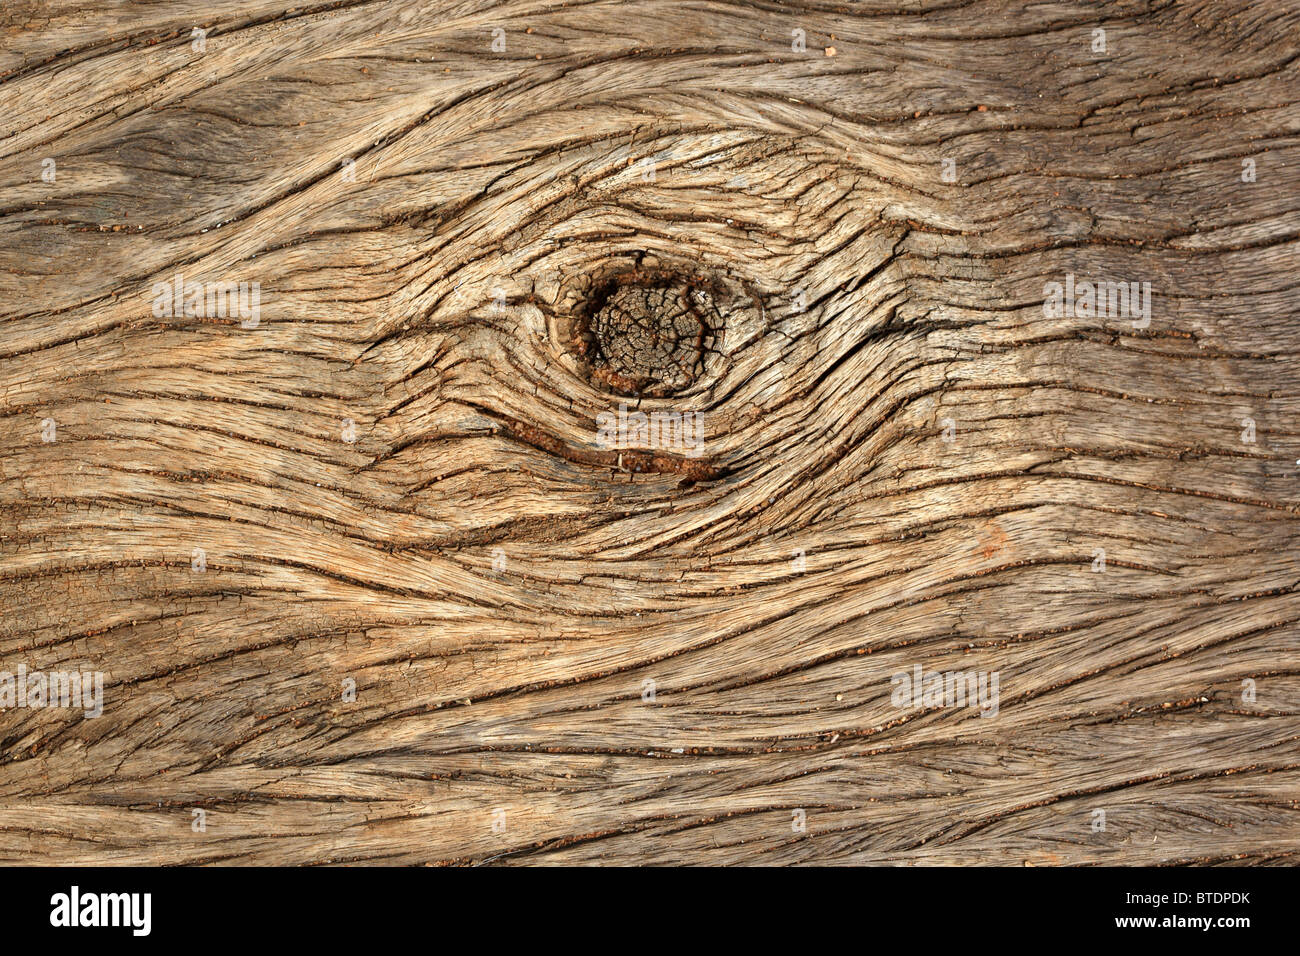 A close up of tree bark showing a knot in the bark Stock Photo